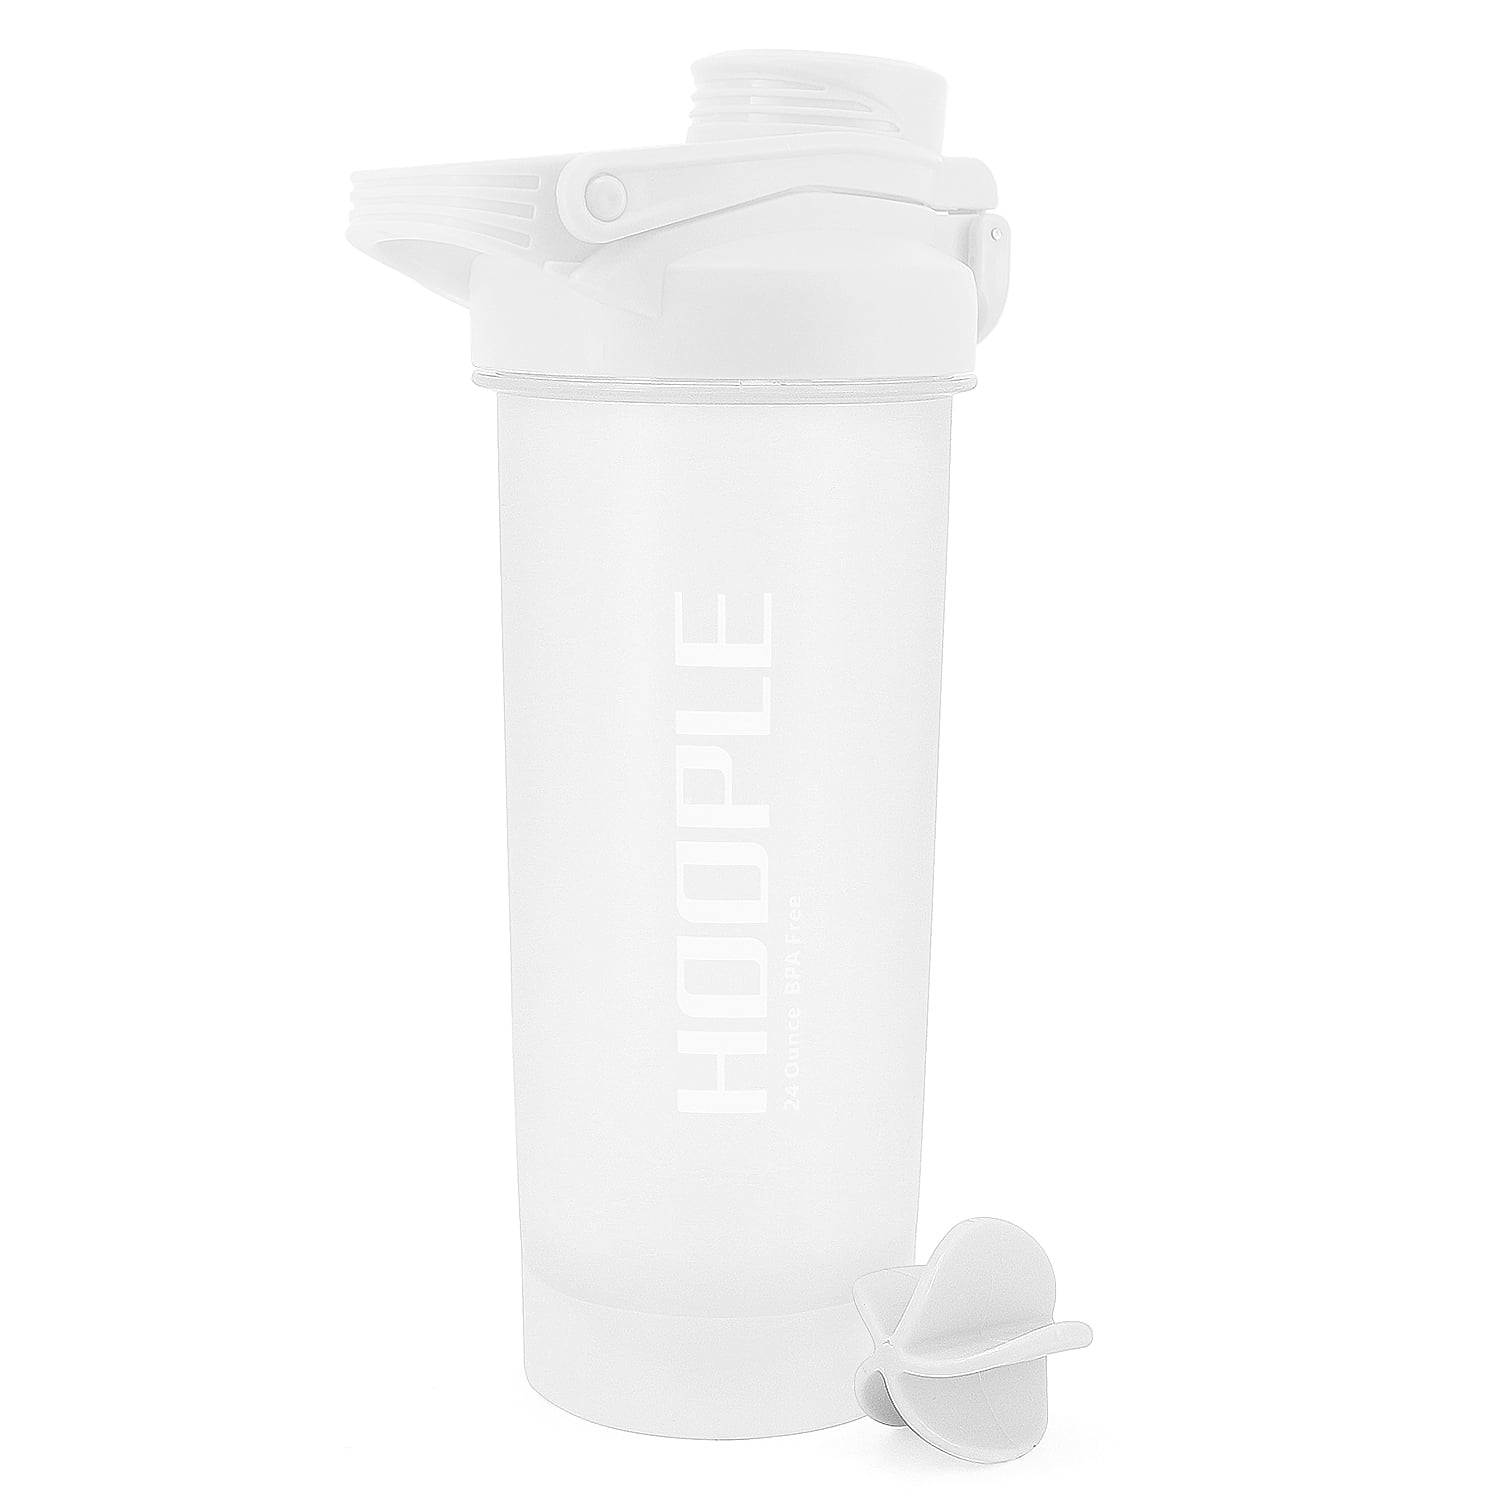 Hoople 24 OZ Shaker Bottle Protein Powder Shake Blender Gym Smoothie Cup,  BPA Free, Auto-Flip Leak-Proof Lid, Handle with Ball Included - Gray –  TOPOKO